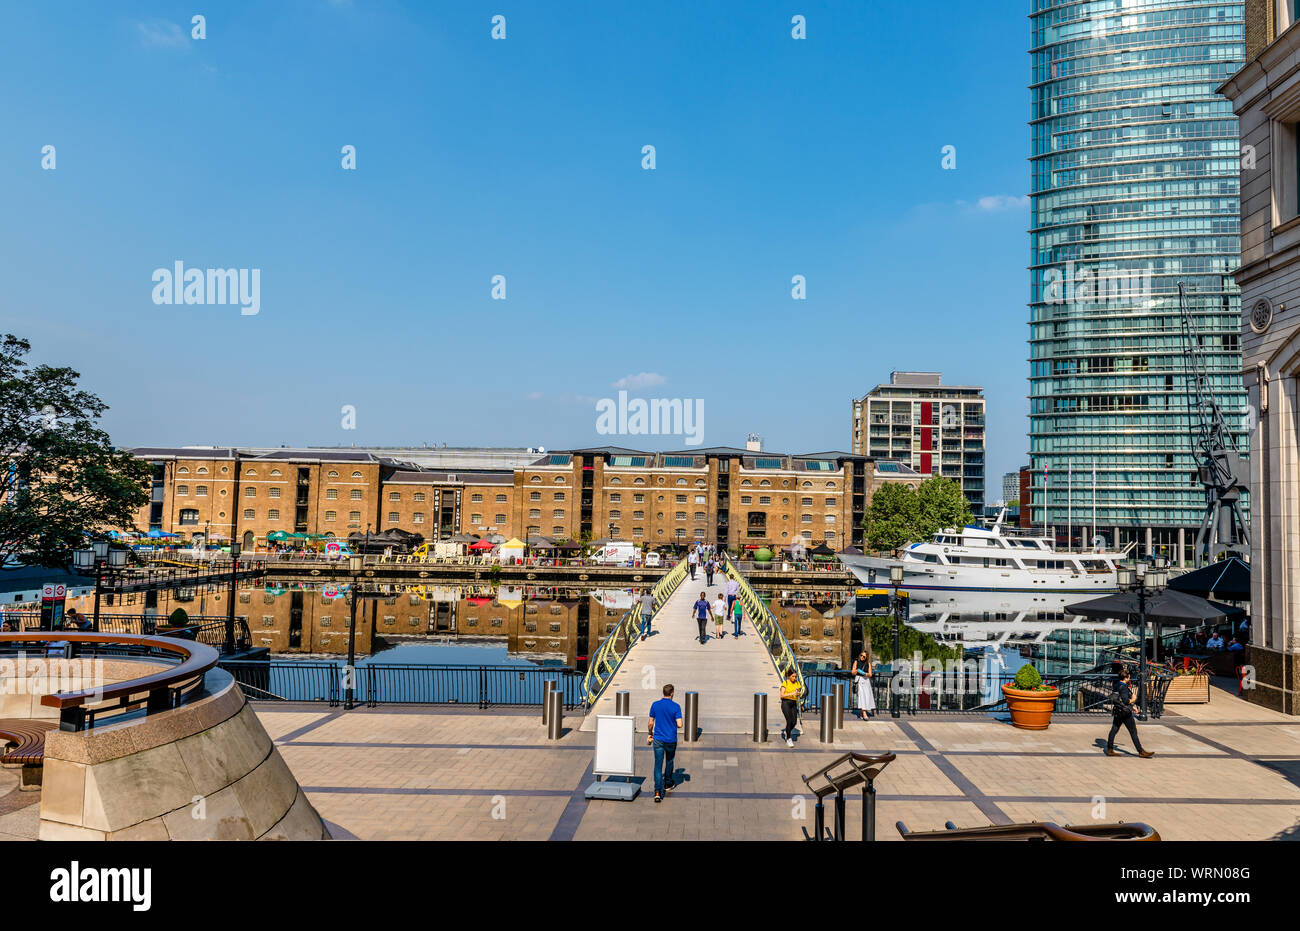 View of the West India Quay, the North Dock and the North Dock pedestrian bridge, in Canary Wharf Estate, London, England. Stock Photo